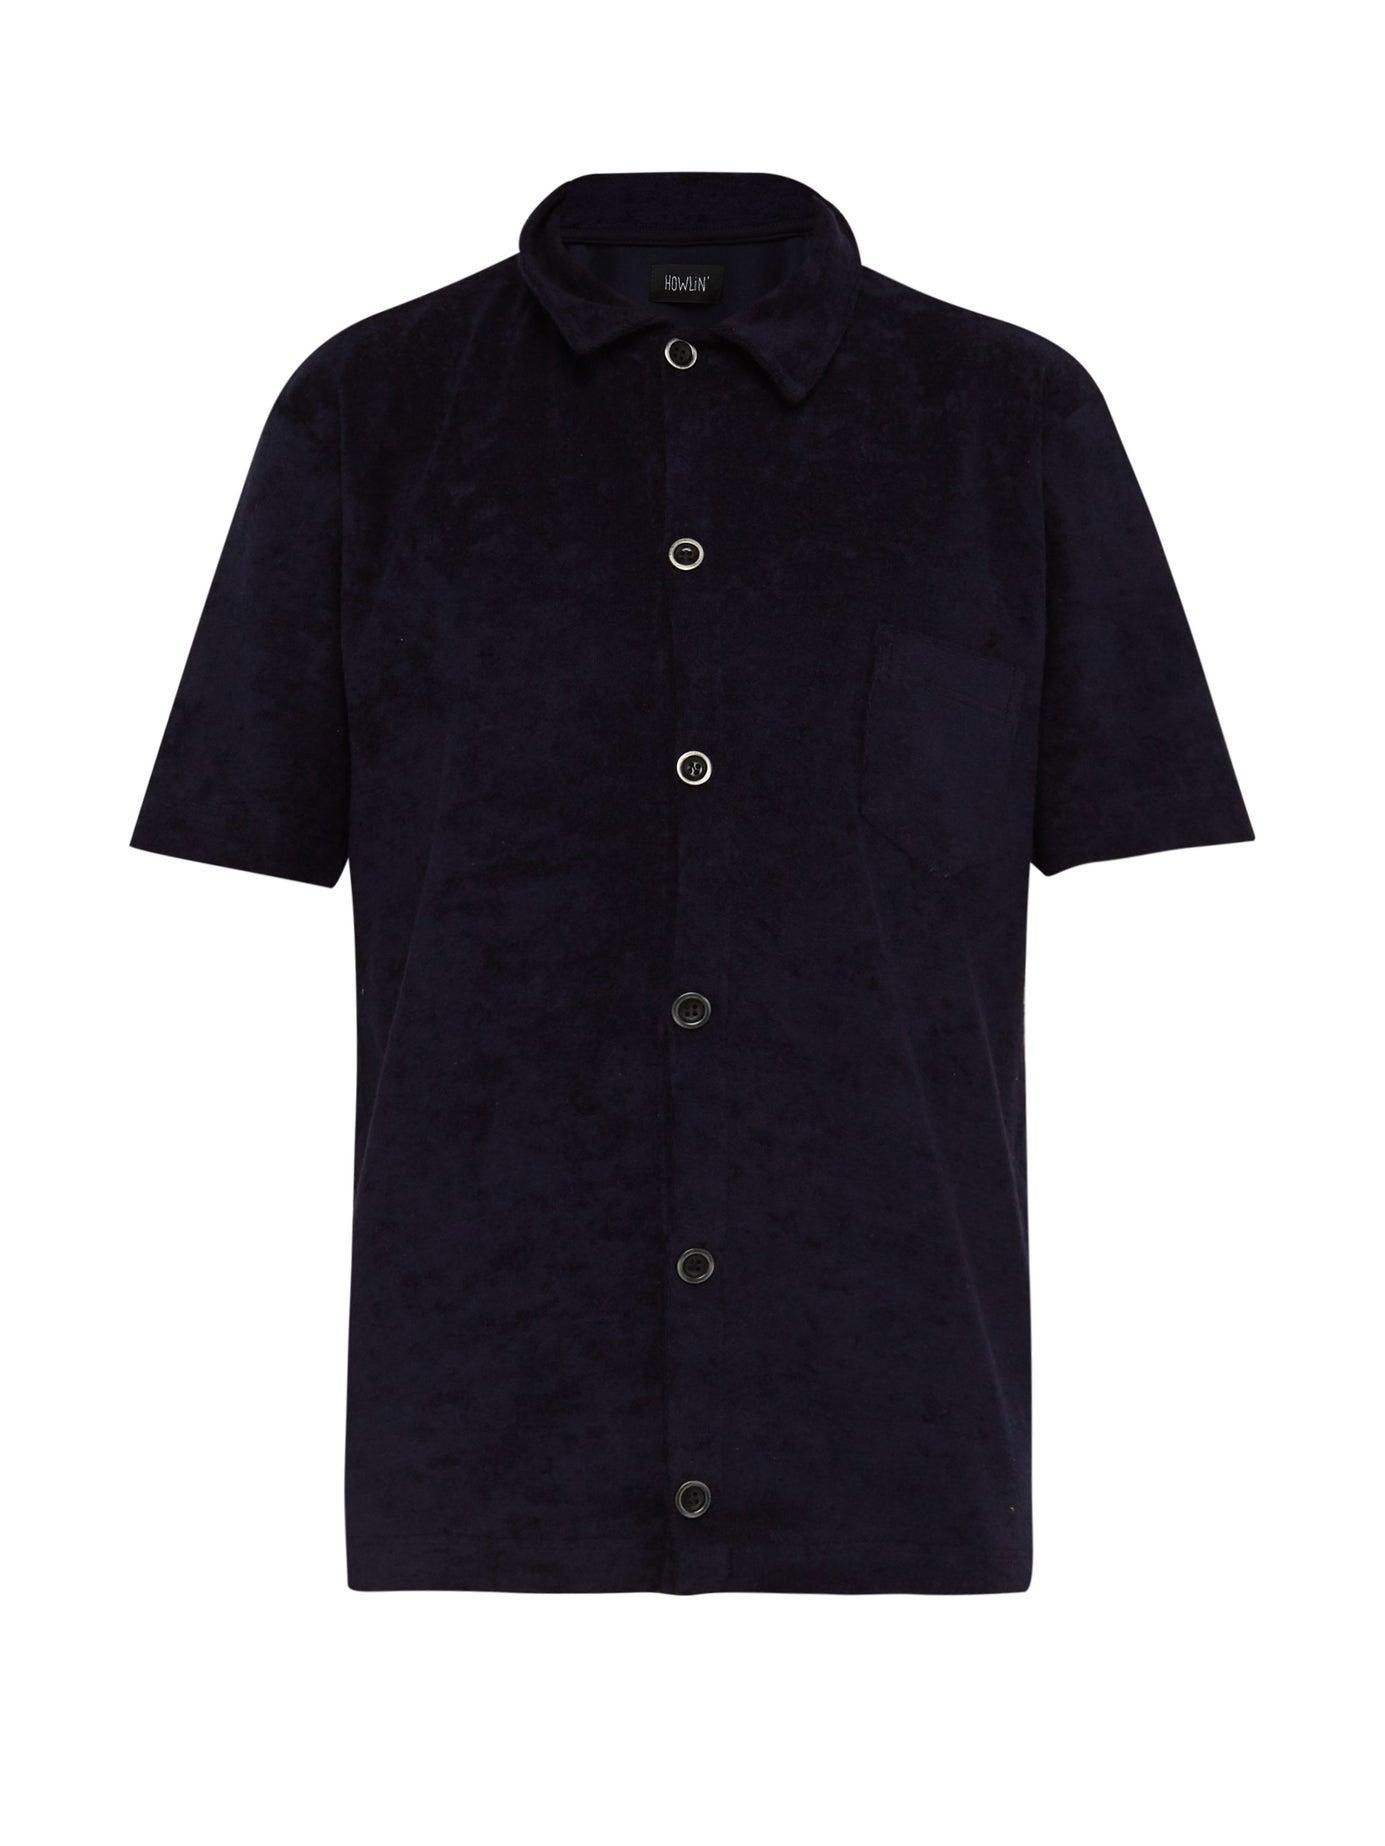 Howlin' By Morrison Cotton Light Flight French-terry Polo Shirt in Navy ...